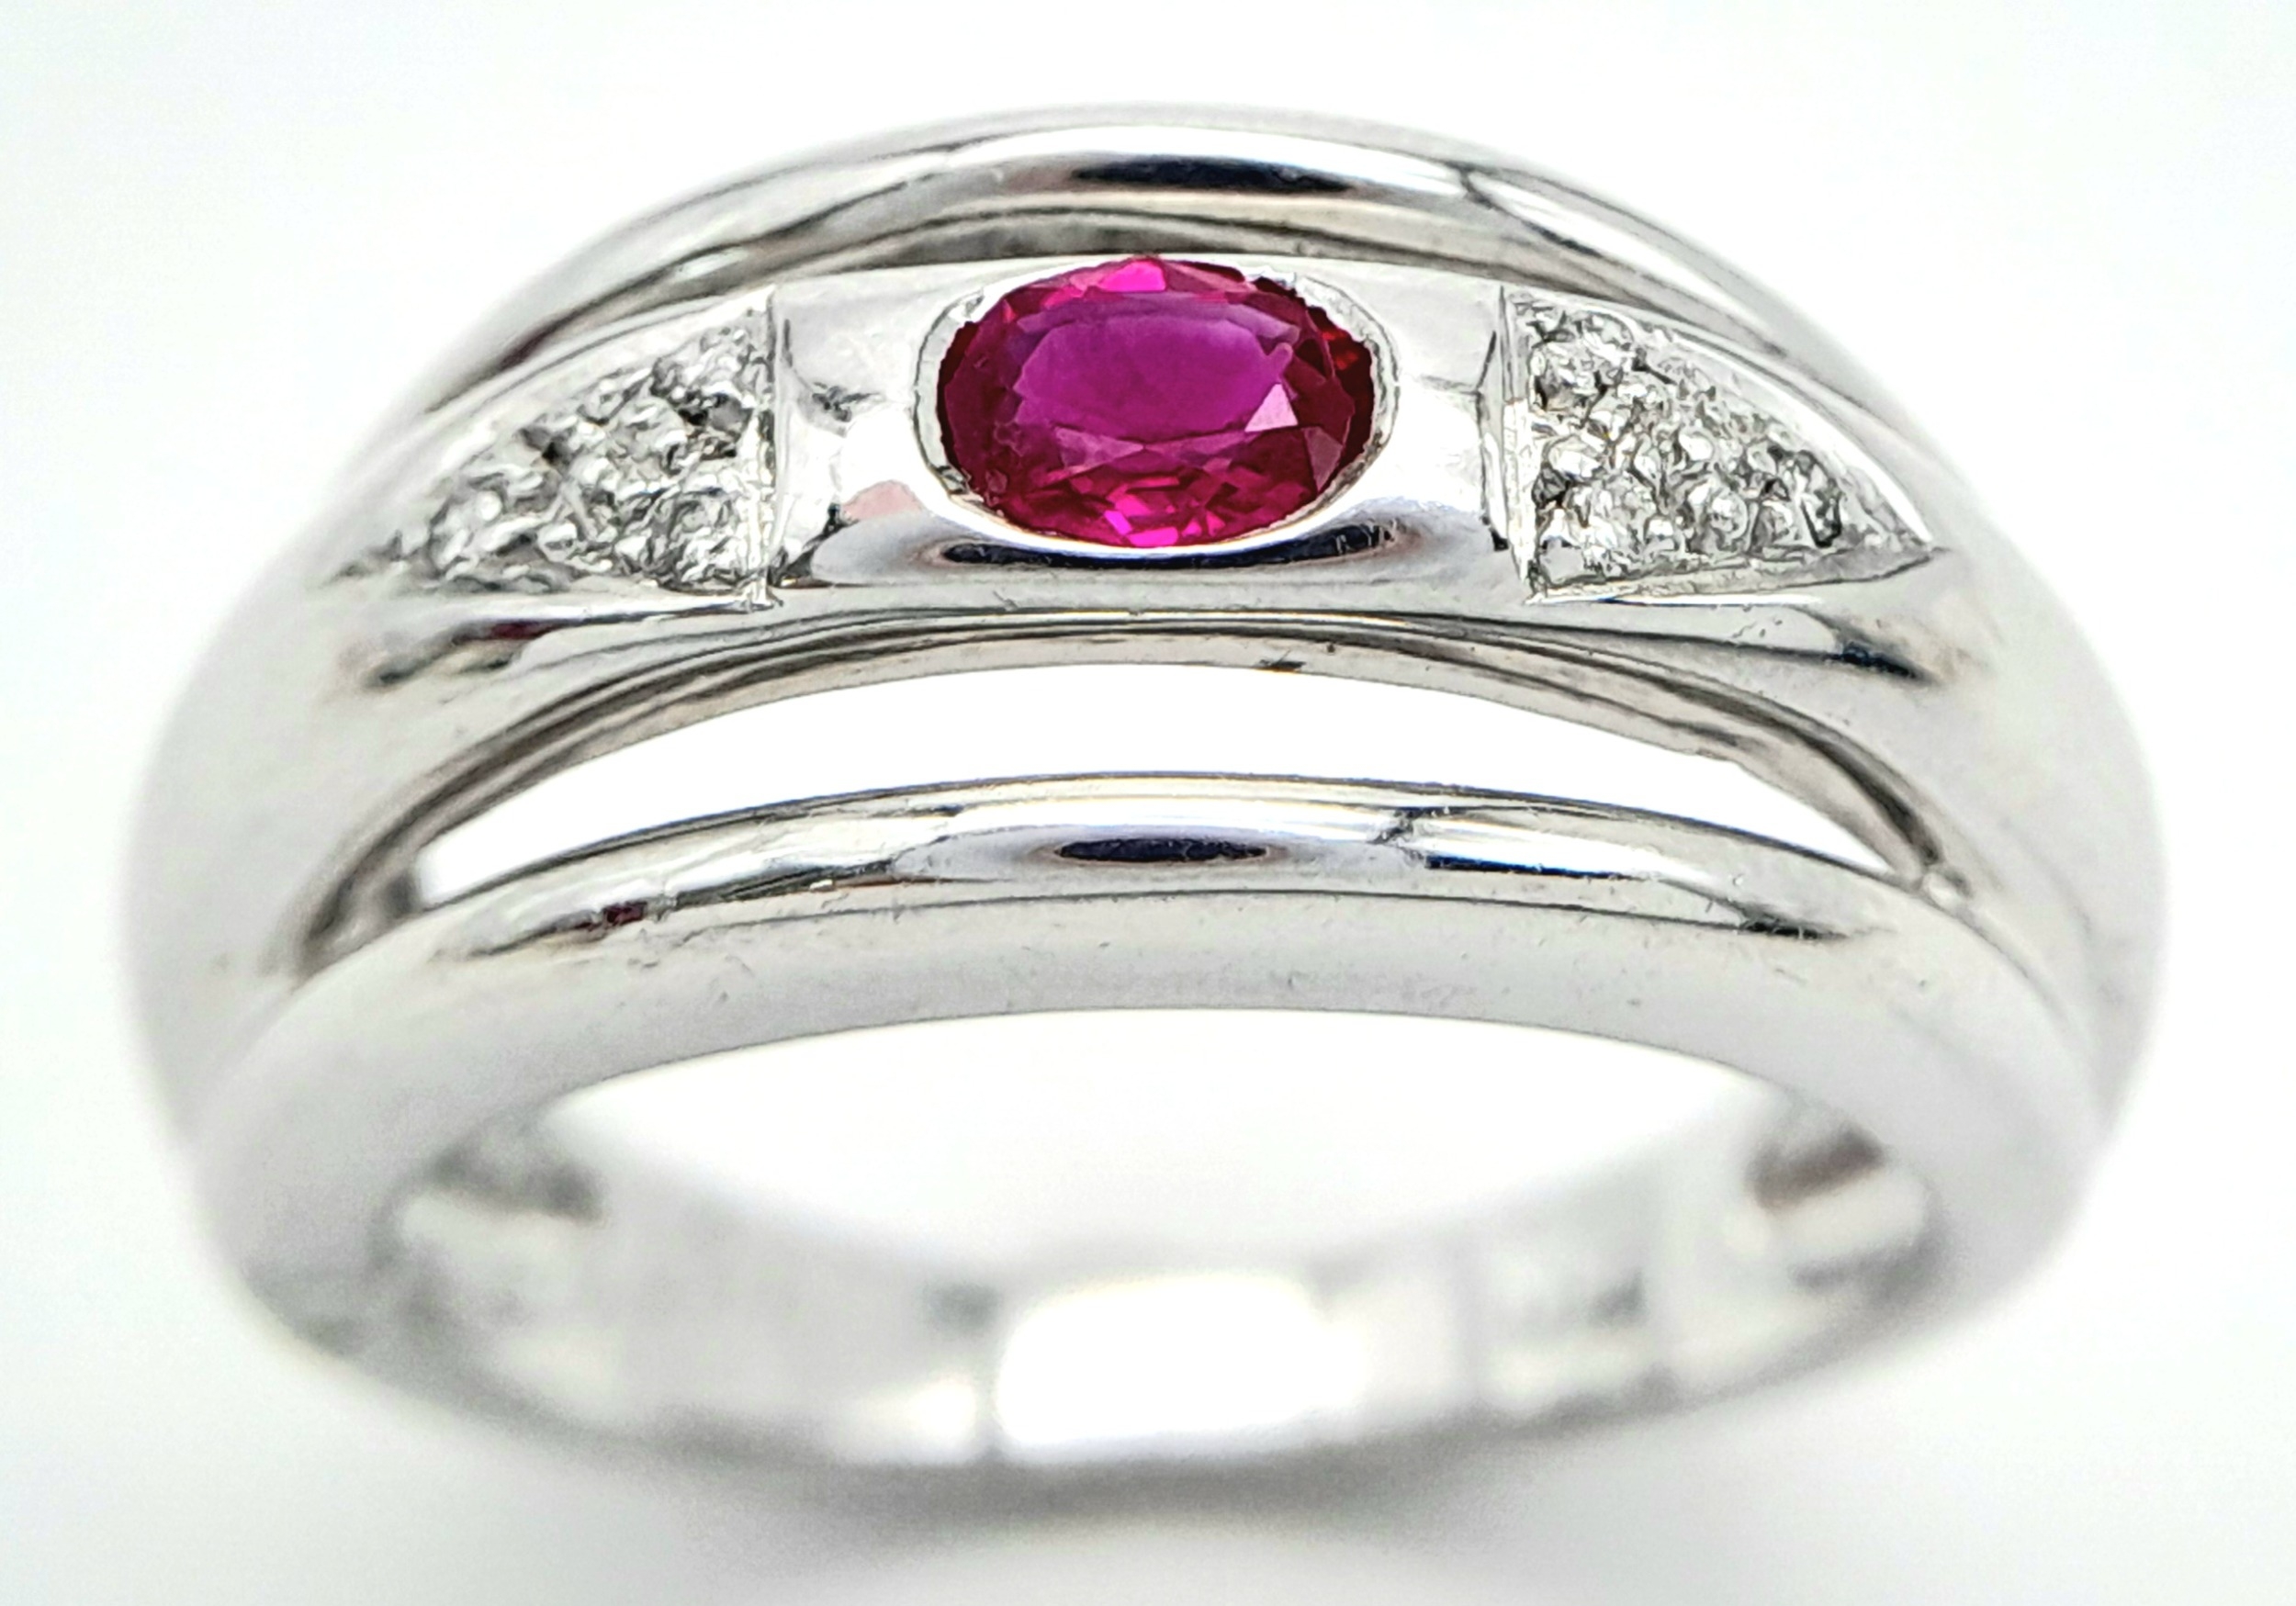 AN 18K WHITE GOLD DIAMOND & RUBY RING. Size N, 6.6g total weight. Ref: SC 8068